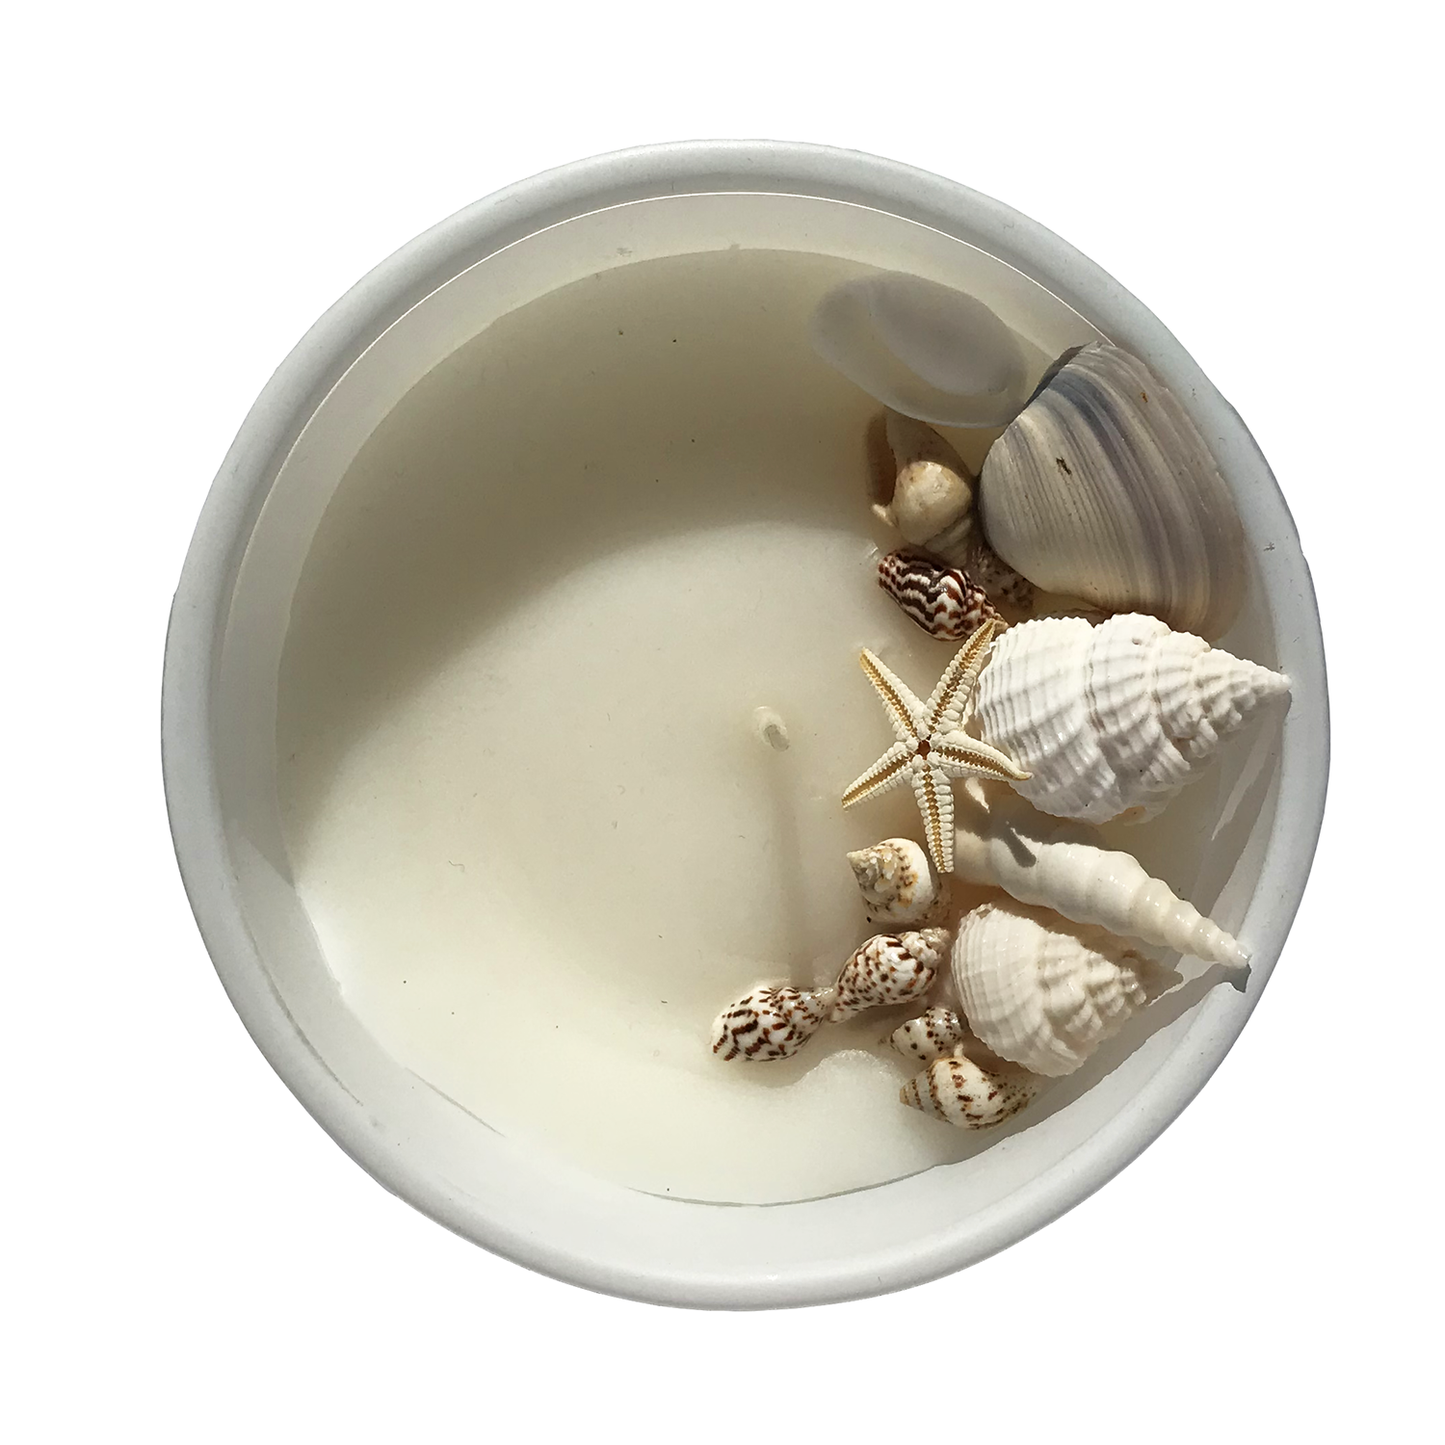 Hunter Gatherer / Pure soy wax shell candle / CORAL DESIGN / Boxed